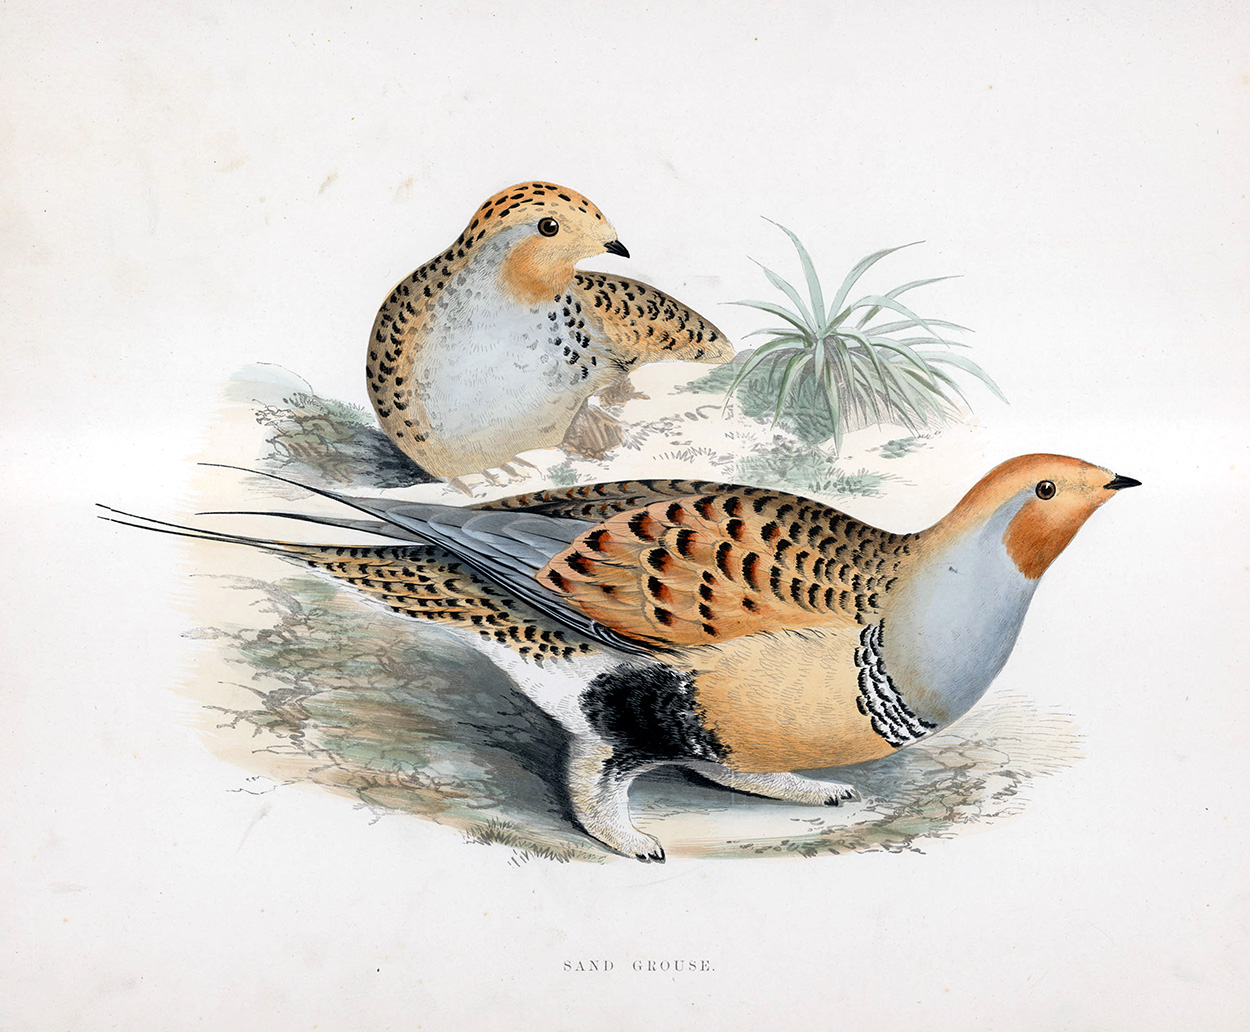 Sand Grouse - hand coloured lithograph 1891 (Print) art by Beverley R Morris Art at The Illustration Art Gallery